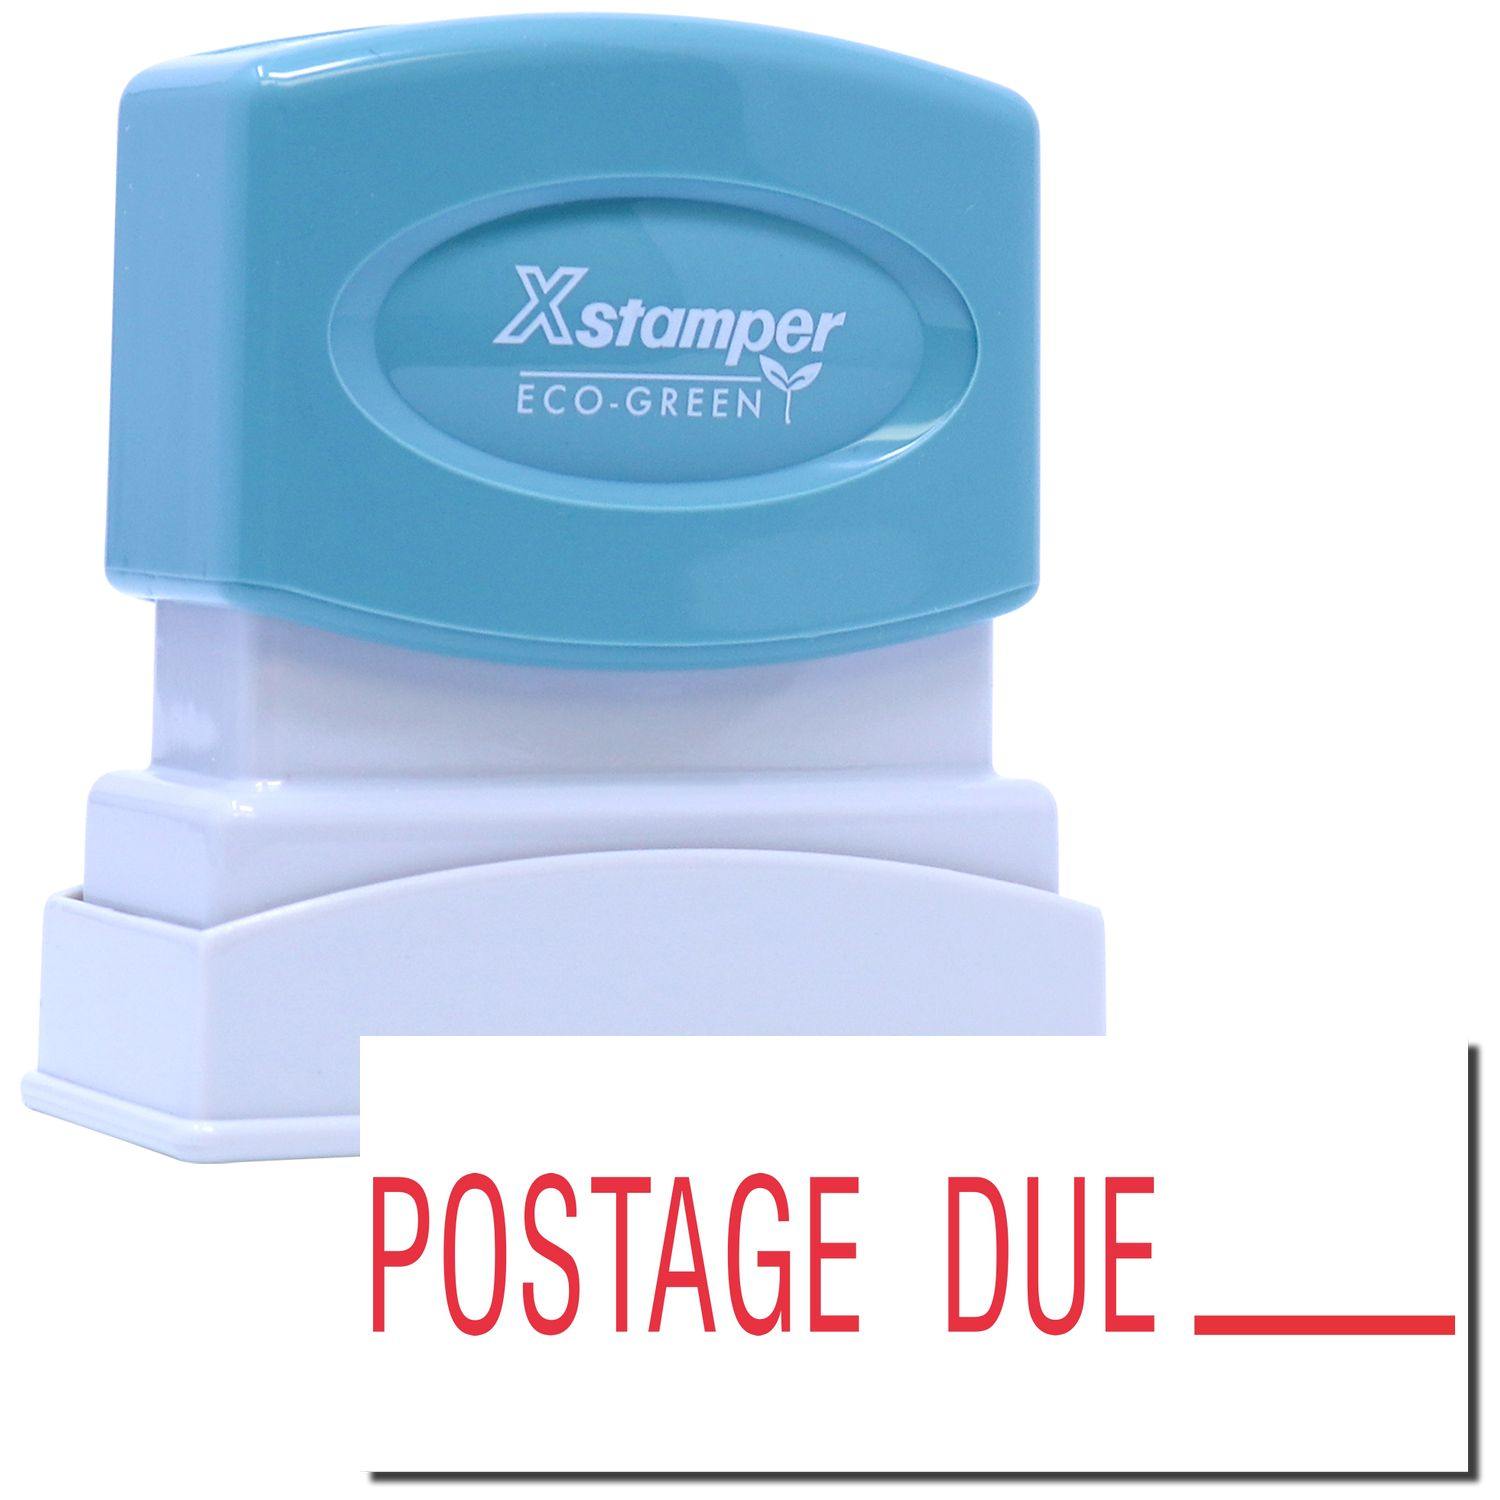 An xstamper stamp with a stamped image showing how the text "POSTAGE DUE" with a line is displayed after stamping.